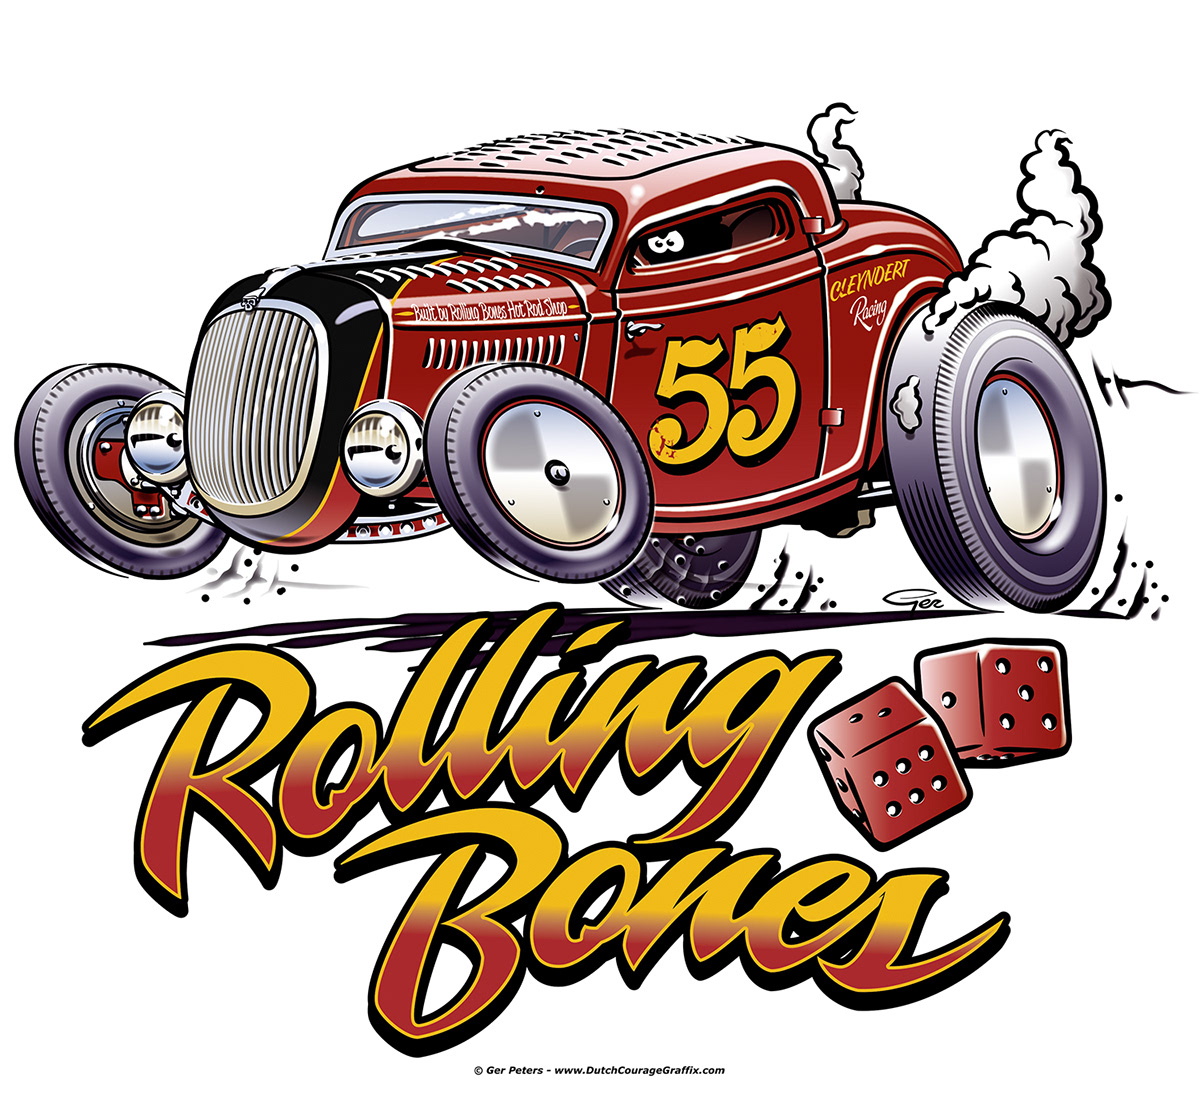 Find more hot rod shop merchandise artwork and hot rod Car-toons on. 